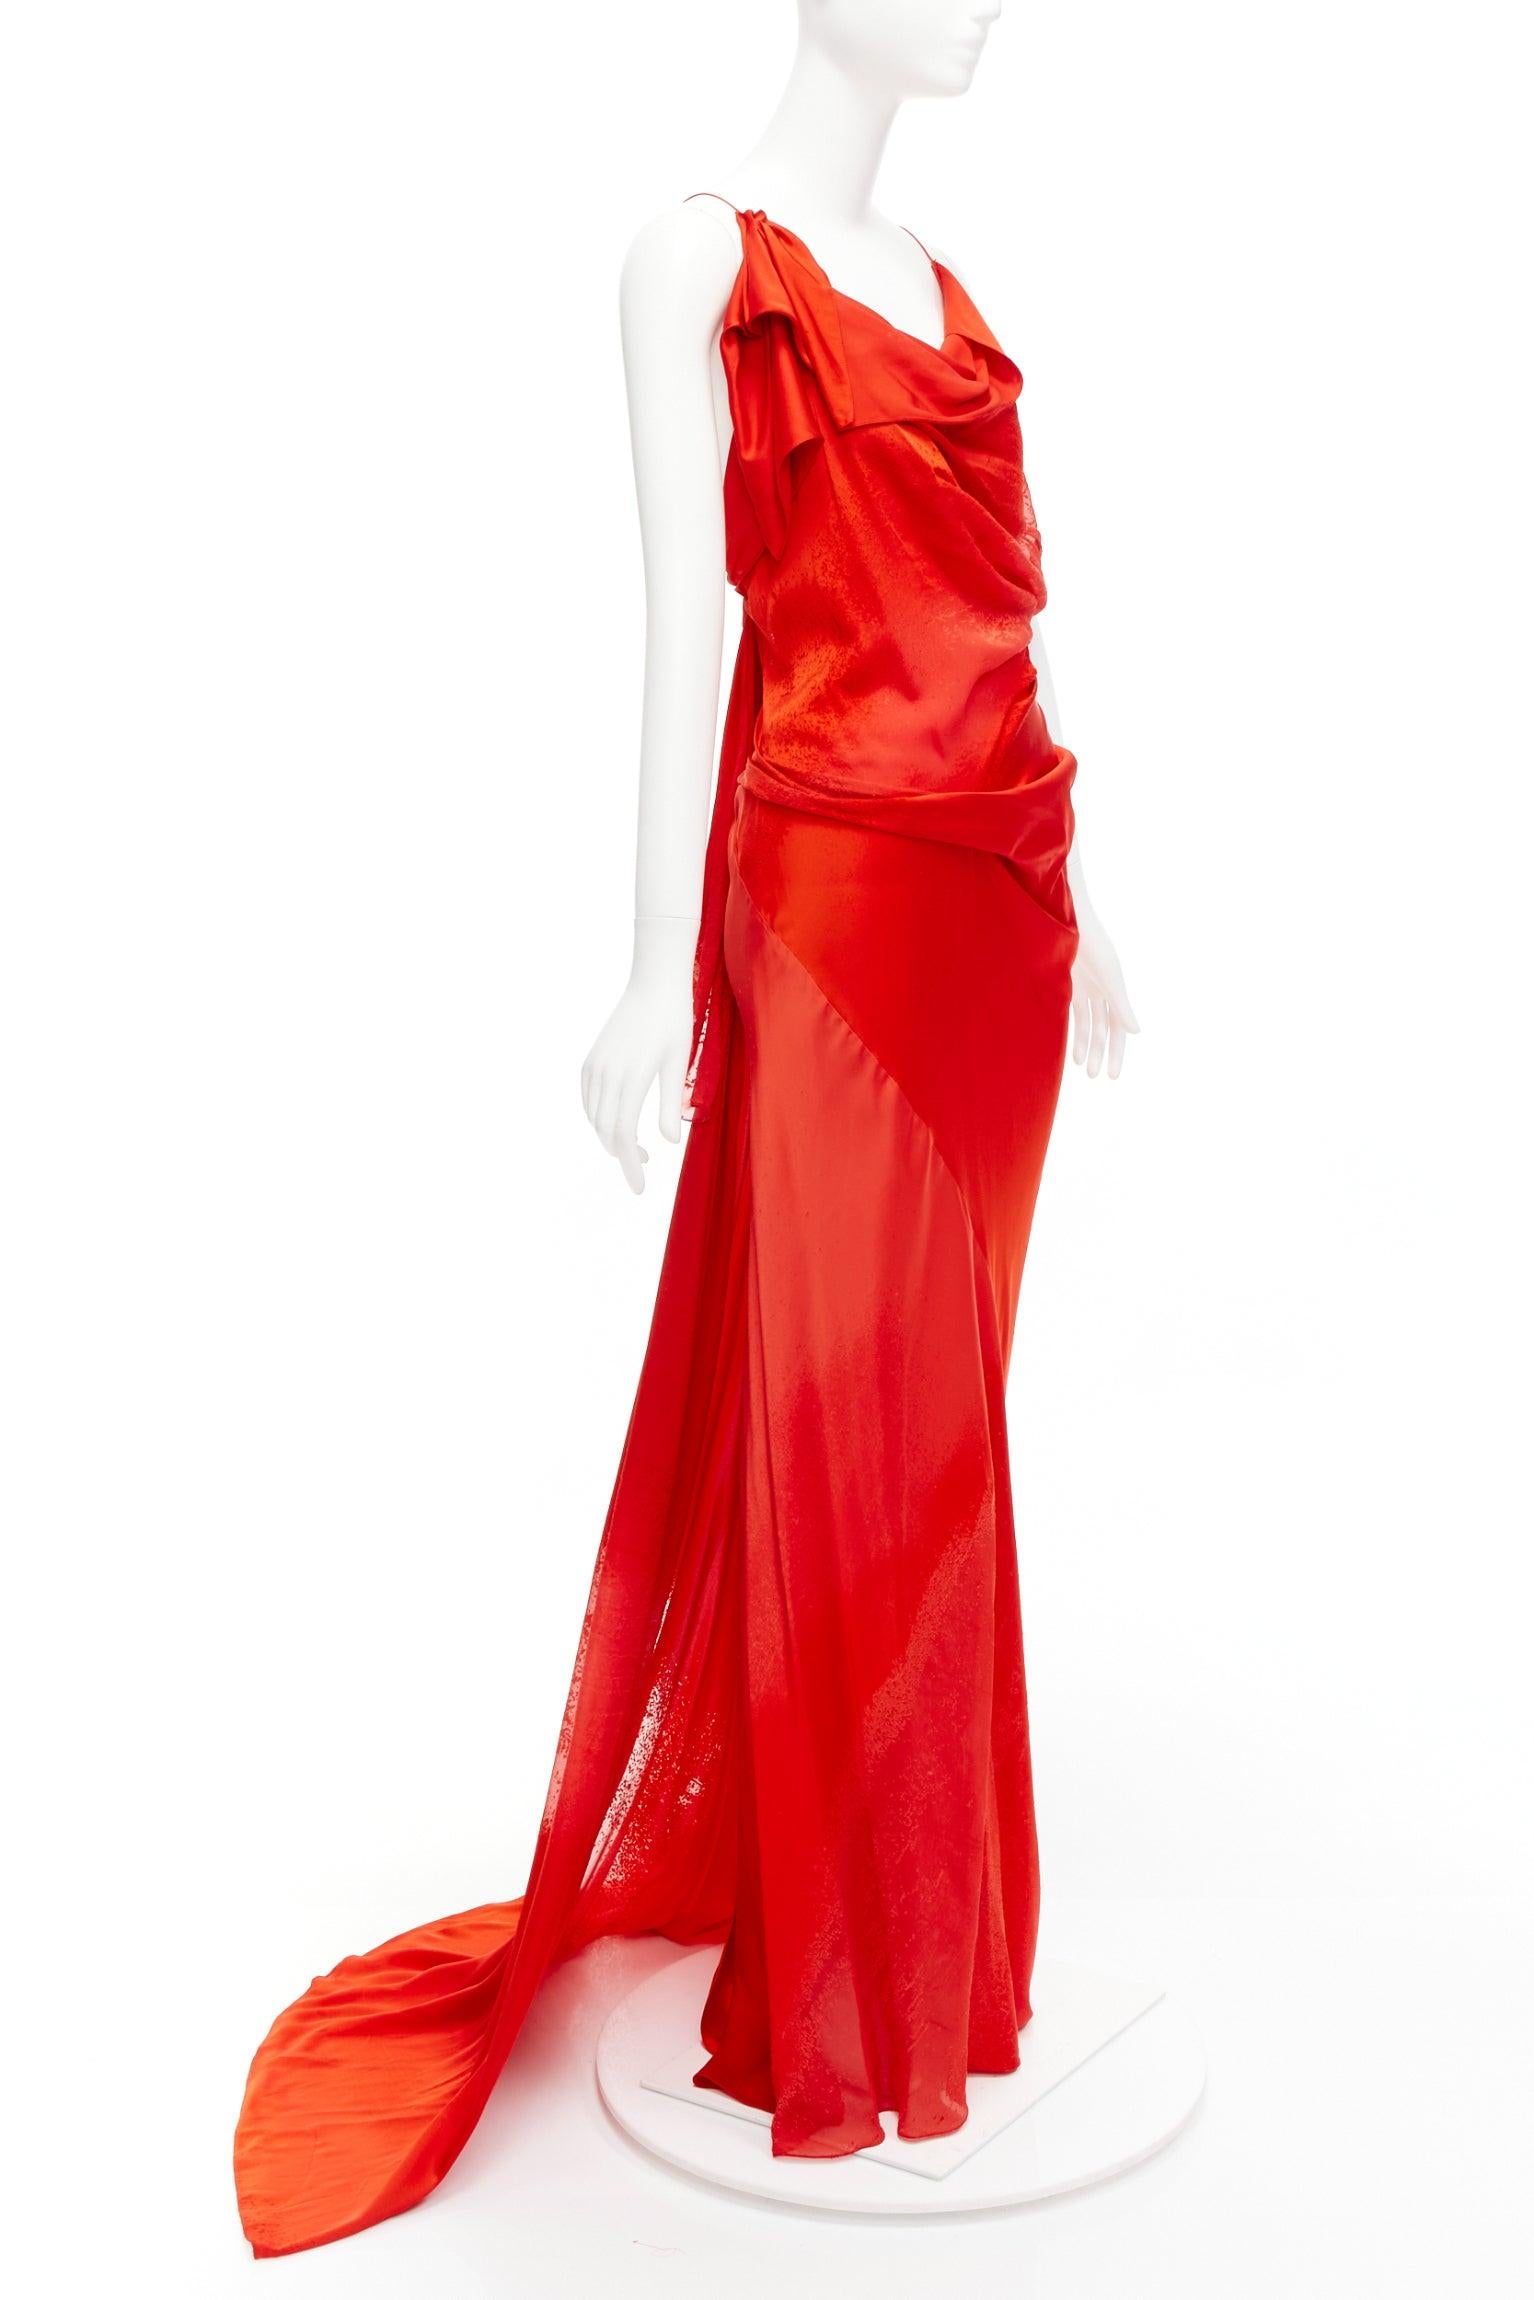 rare DONNA KARAN Runway red distressed devore viscose silk drape bias cut train gown US2 S
Reference: TGAS/D00880
Brand: Donna Karan
Collection: SS 2010 - Runway
Material: Viscose, Silk
Color: Red
Pattern: Solid
Closure: Slip On
Extra Details: